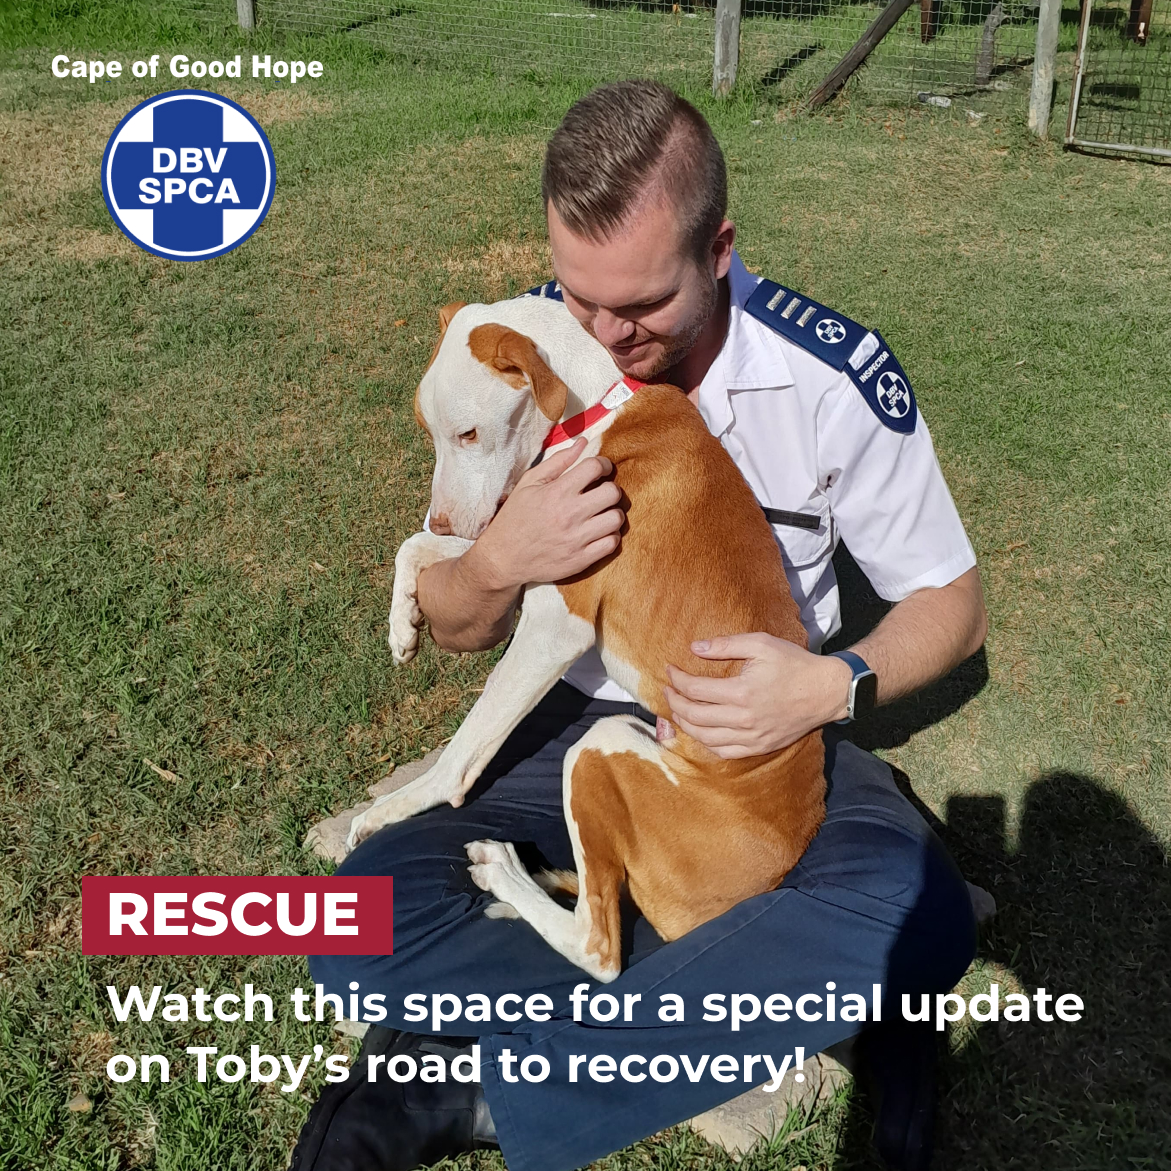 🎉 We have a special visitor tomorrow, keep an eye out for our posts and more updates on Toby’s recovery! 👇 pulse.ly/mmvv7p2otk 🦸🏽‍♂🦸🏼#AnyoneCanBeAHero #HeroesOfTheSPCA #AnimalRescue #SaveToby #DogAbuse #DogRehabilitation #StarvationAnaemia #CapeSPCA #CapeTown